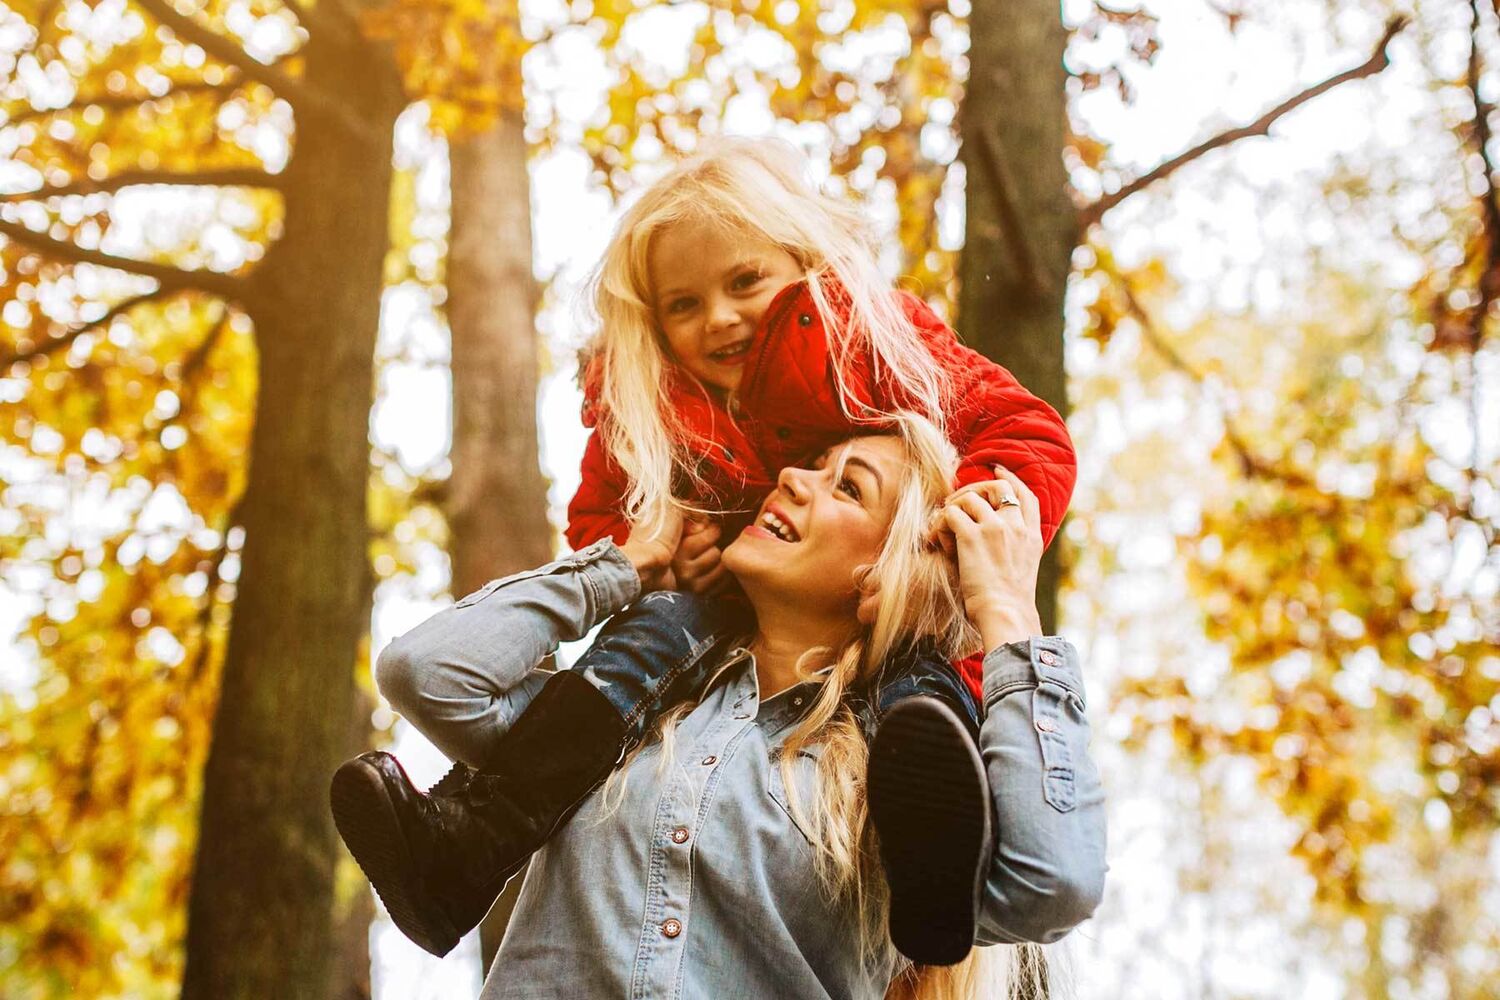 Woman With Young Girl On Shoulders In Autumnal Forest